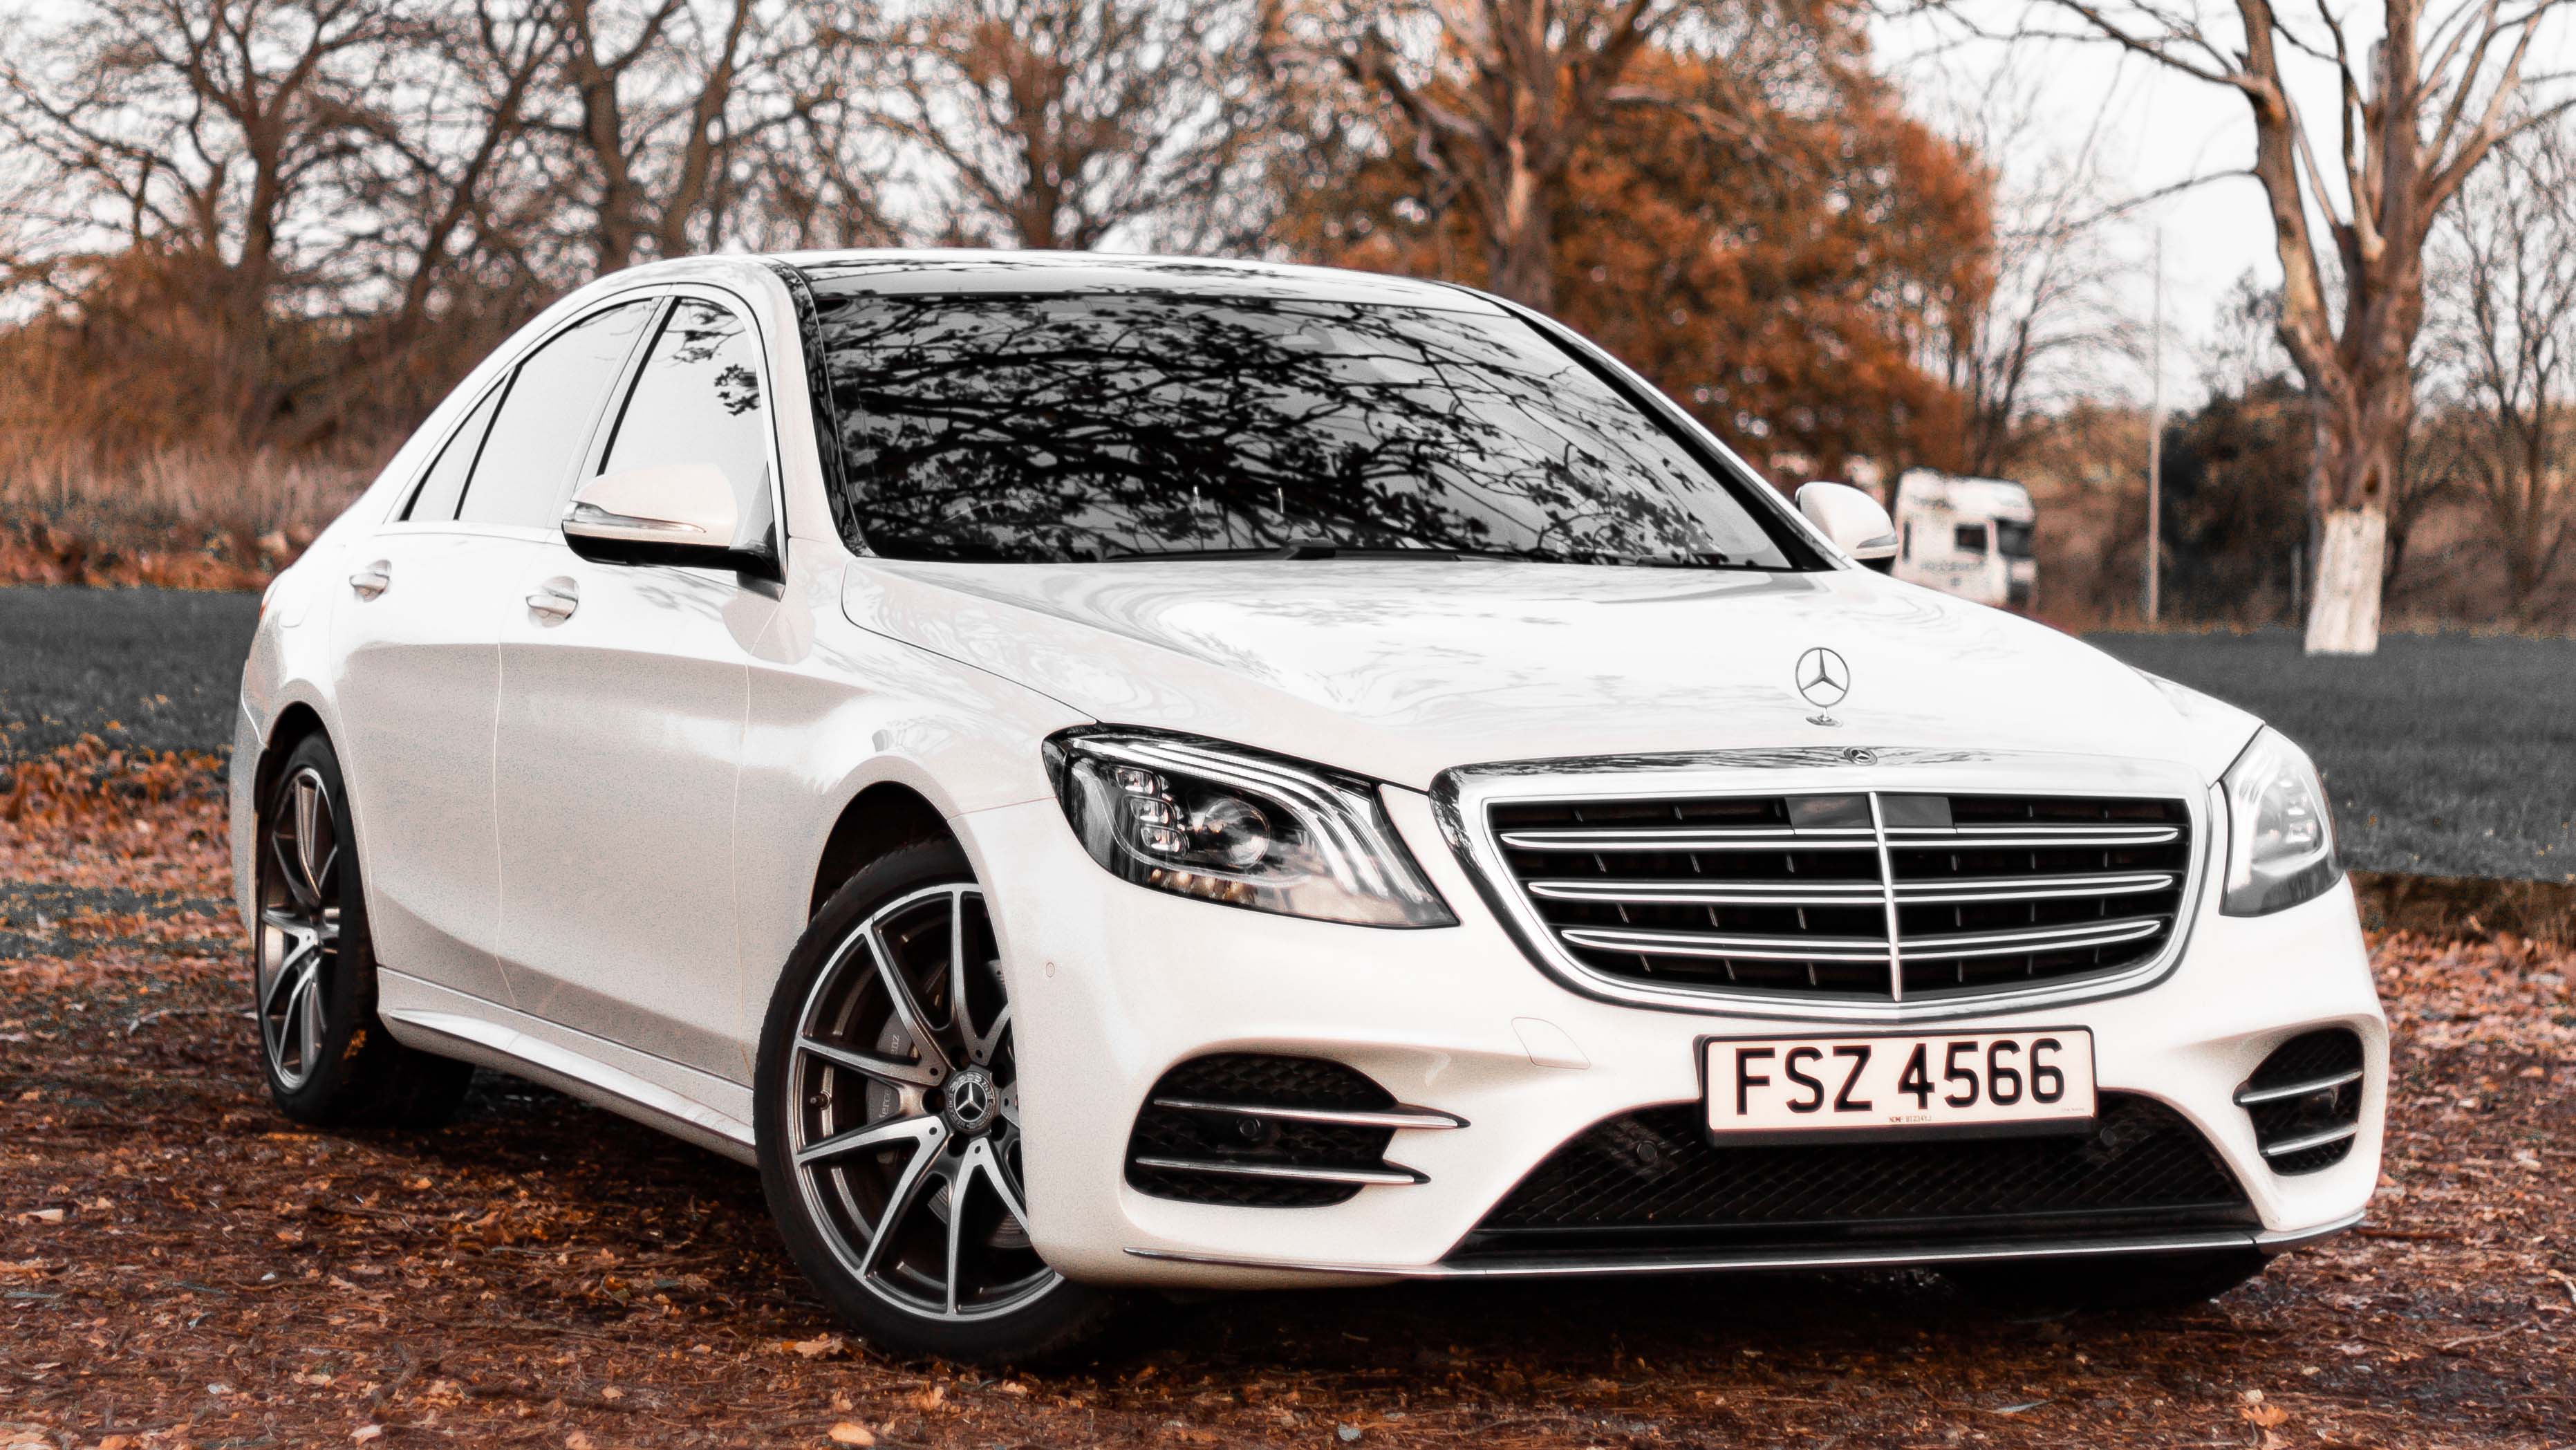 Mercedes S-Class AMG wedding car for hire in London